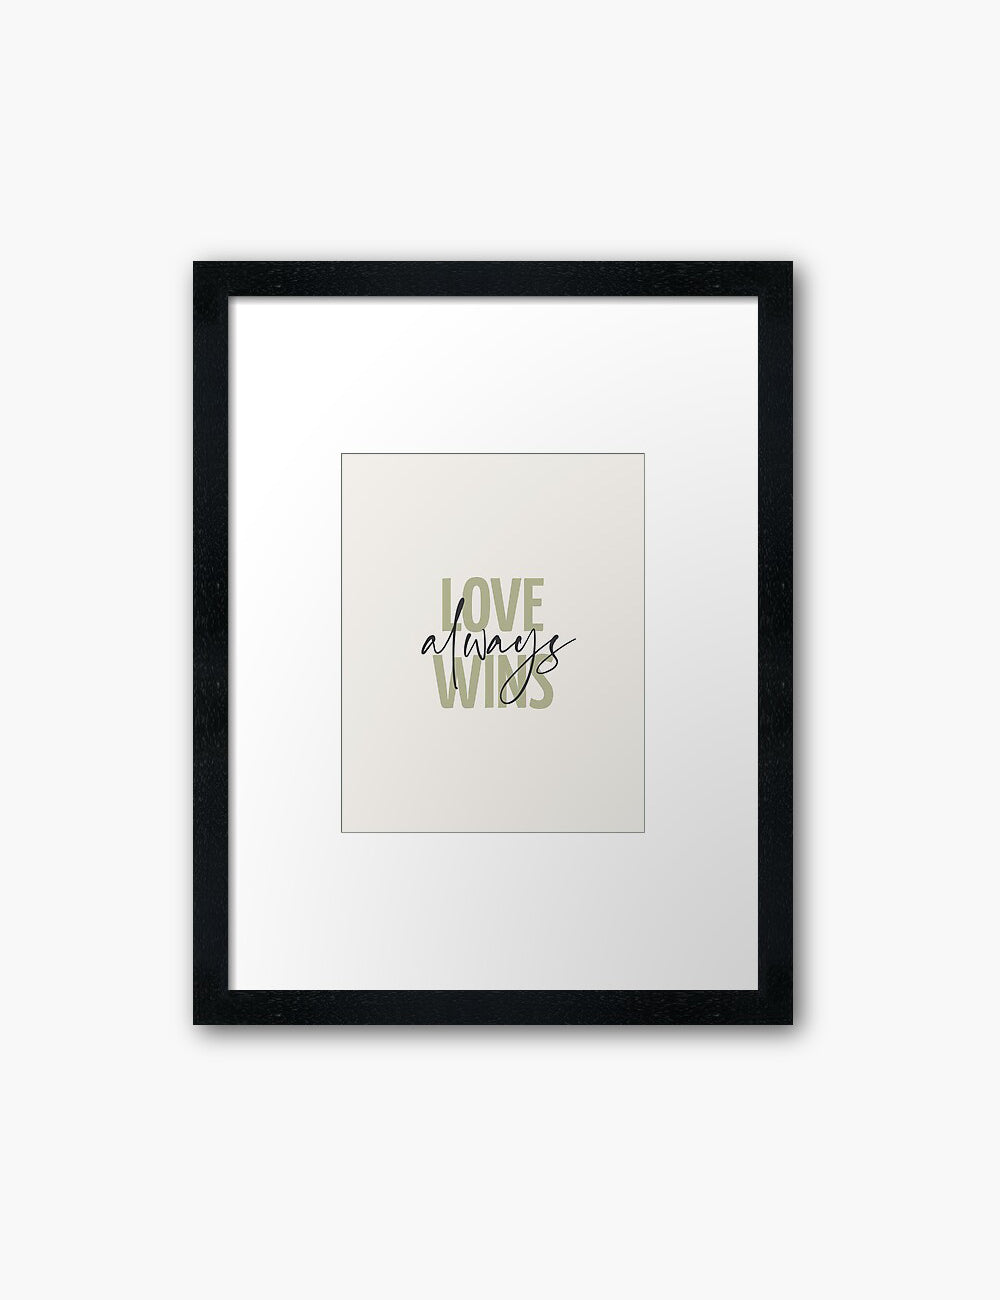 LOVE ALWAYS WINS. Green. Love quote. Romantic words. Printable Wall Art Quote. - PAPER MOON Art & Design